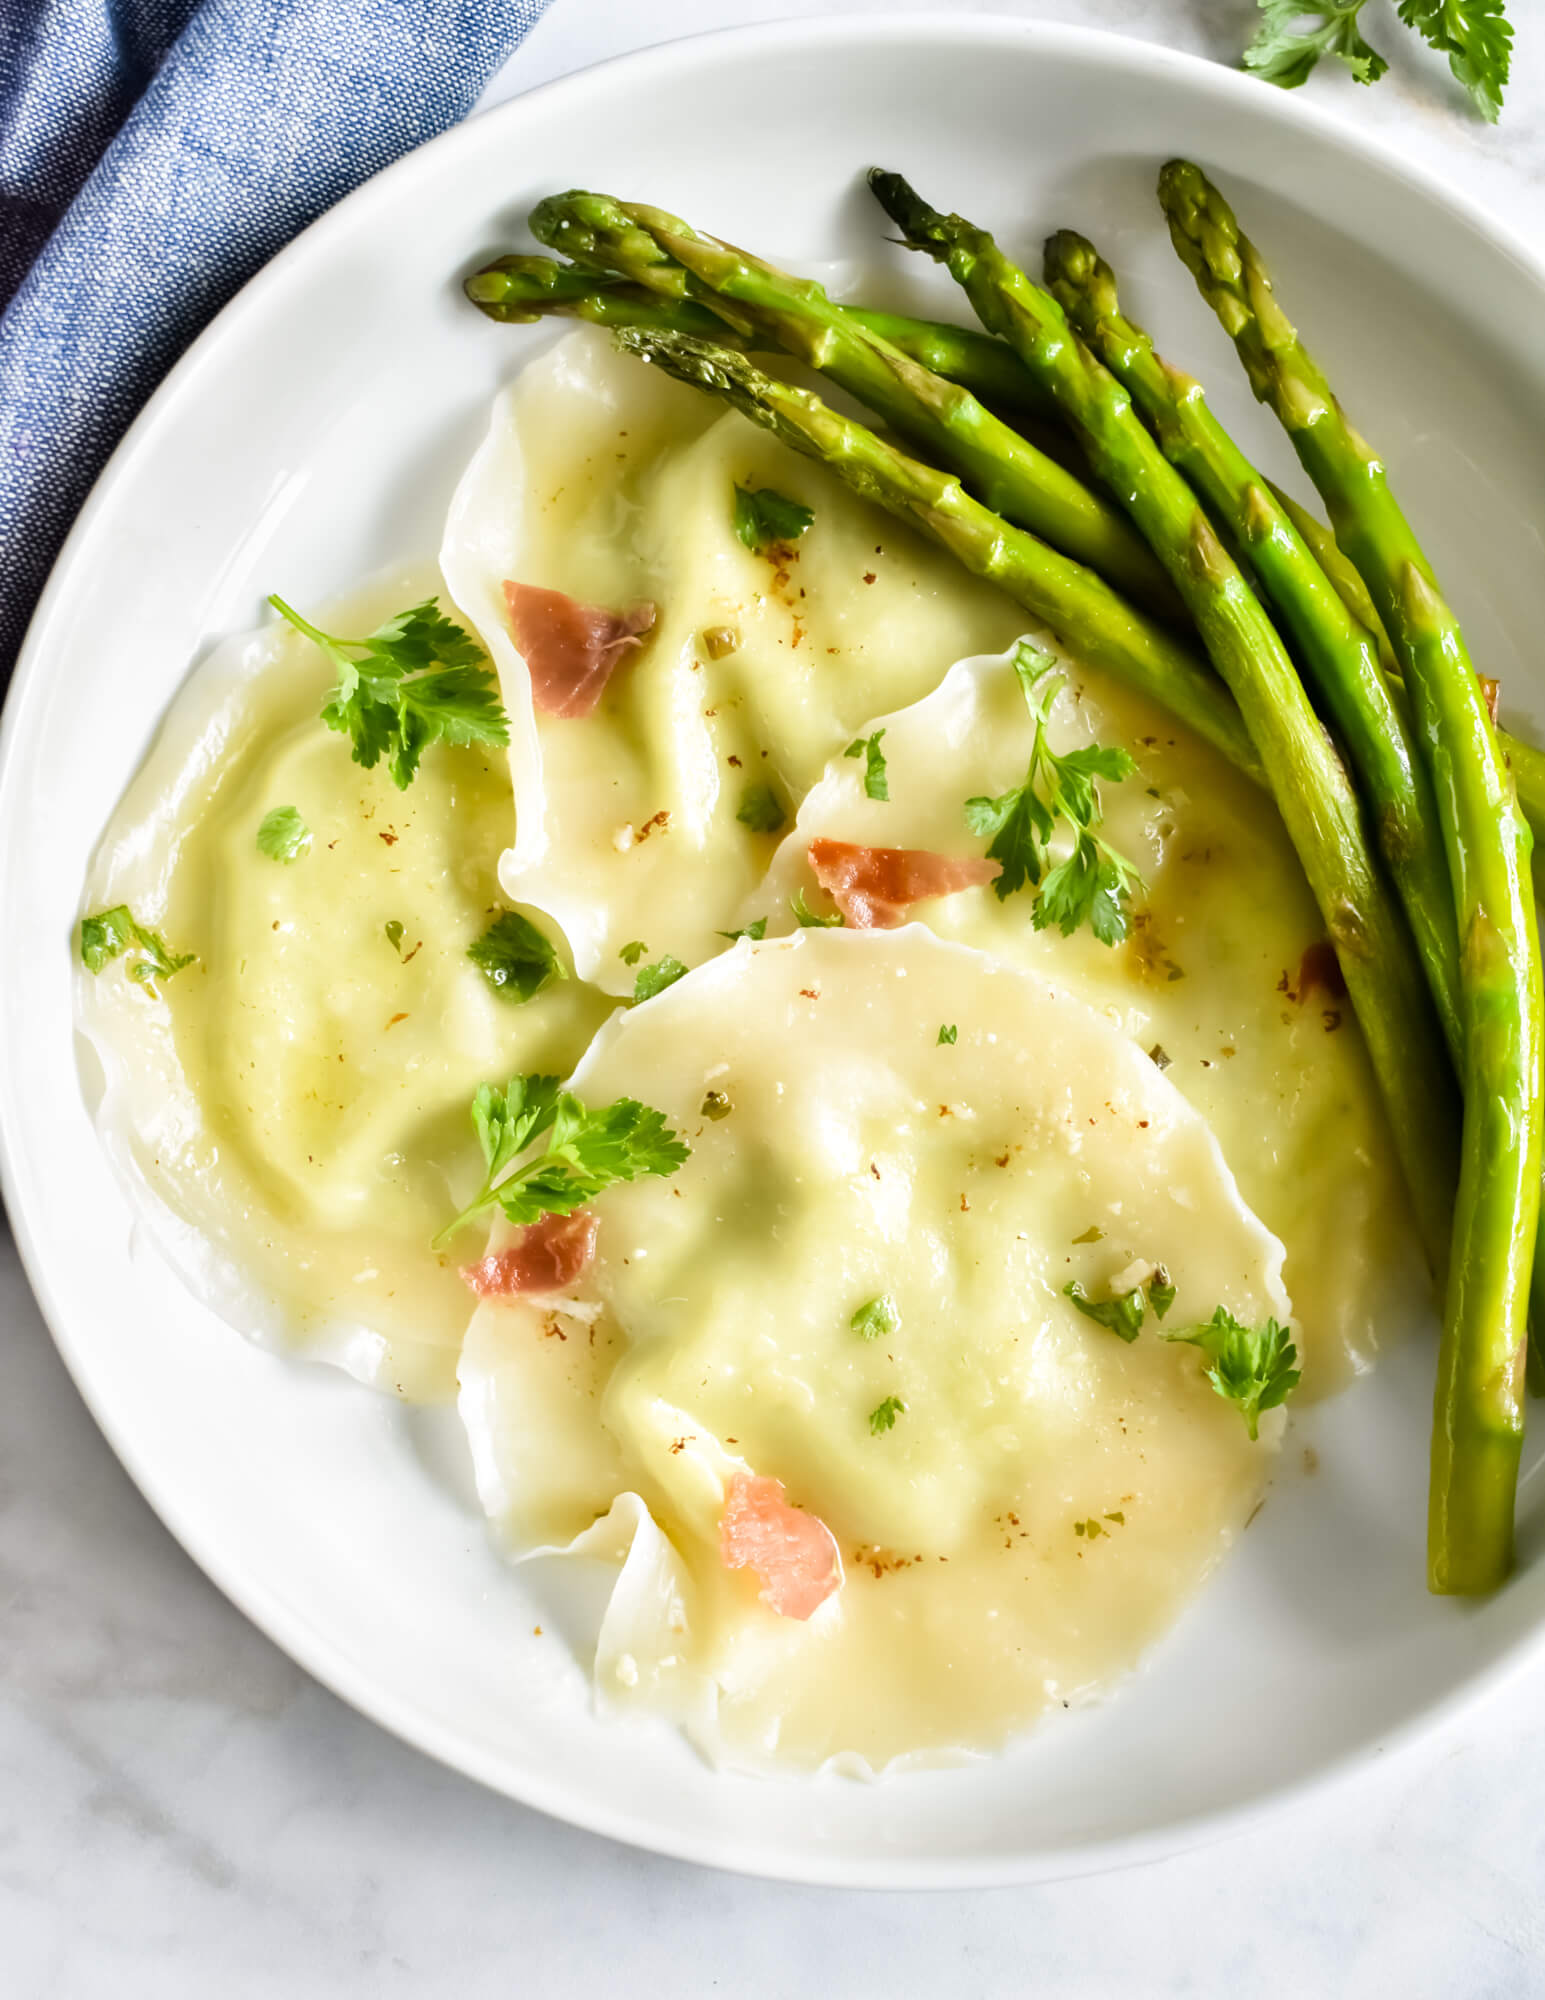 A plate of asparagus ricotta ravioli made with wonton wrappers and topped with crispy prosciutto and fresh herbs served with fresh asparagus set next to a blue cloth napkin.